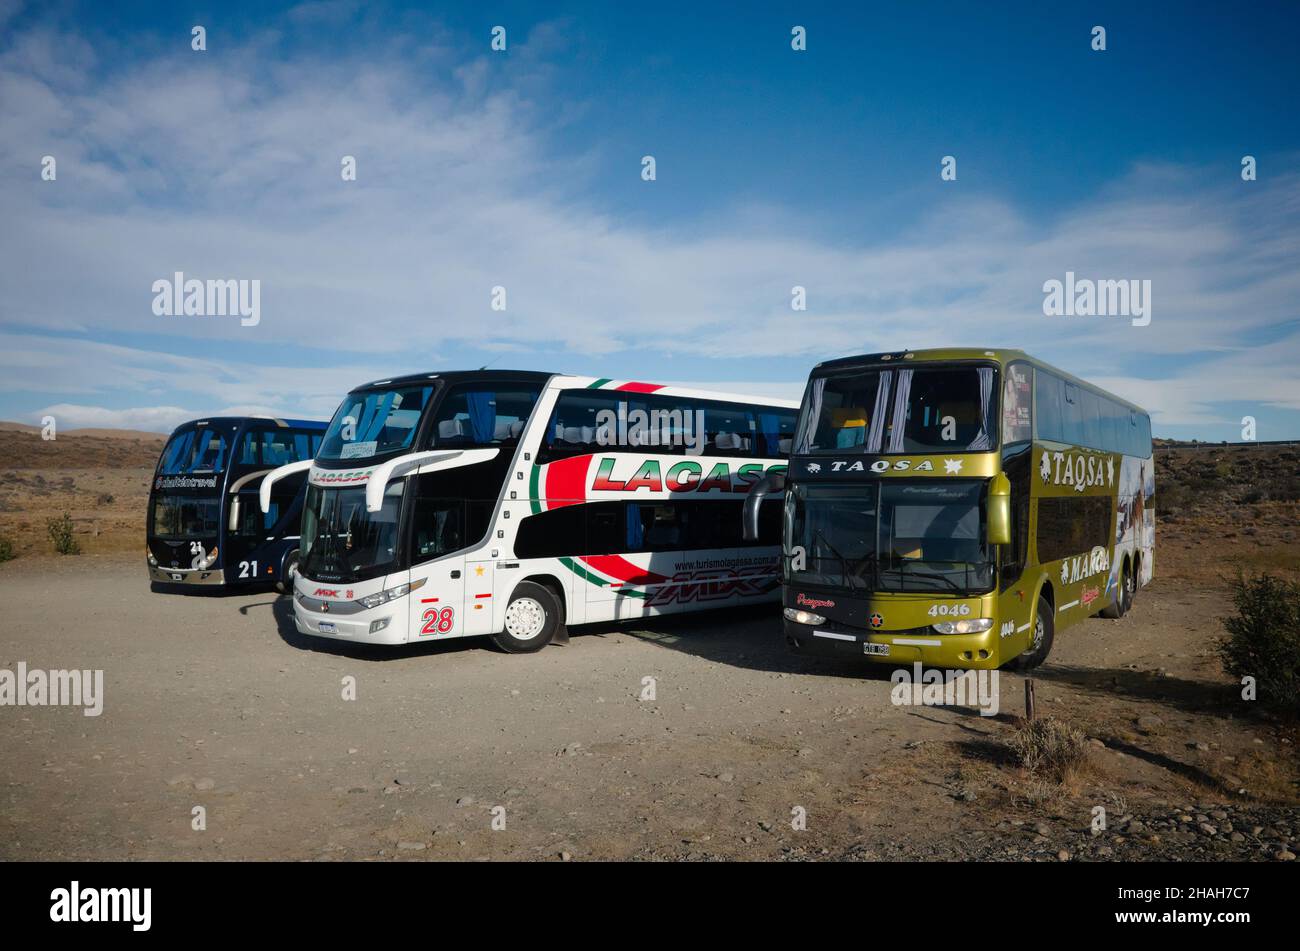 Santa Cruz, Argentina - March, 2020: Buses of different bus companies stopt on route between El Calafate to El Chalten. Bus passenger transportation Stock Photo